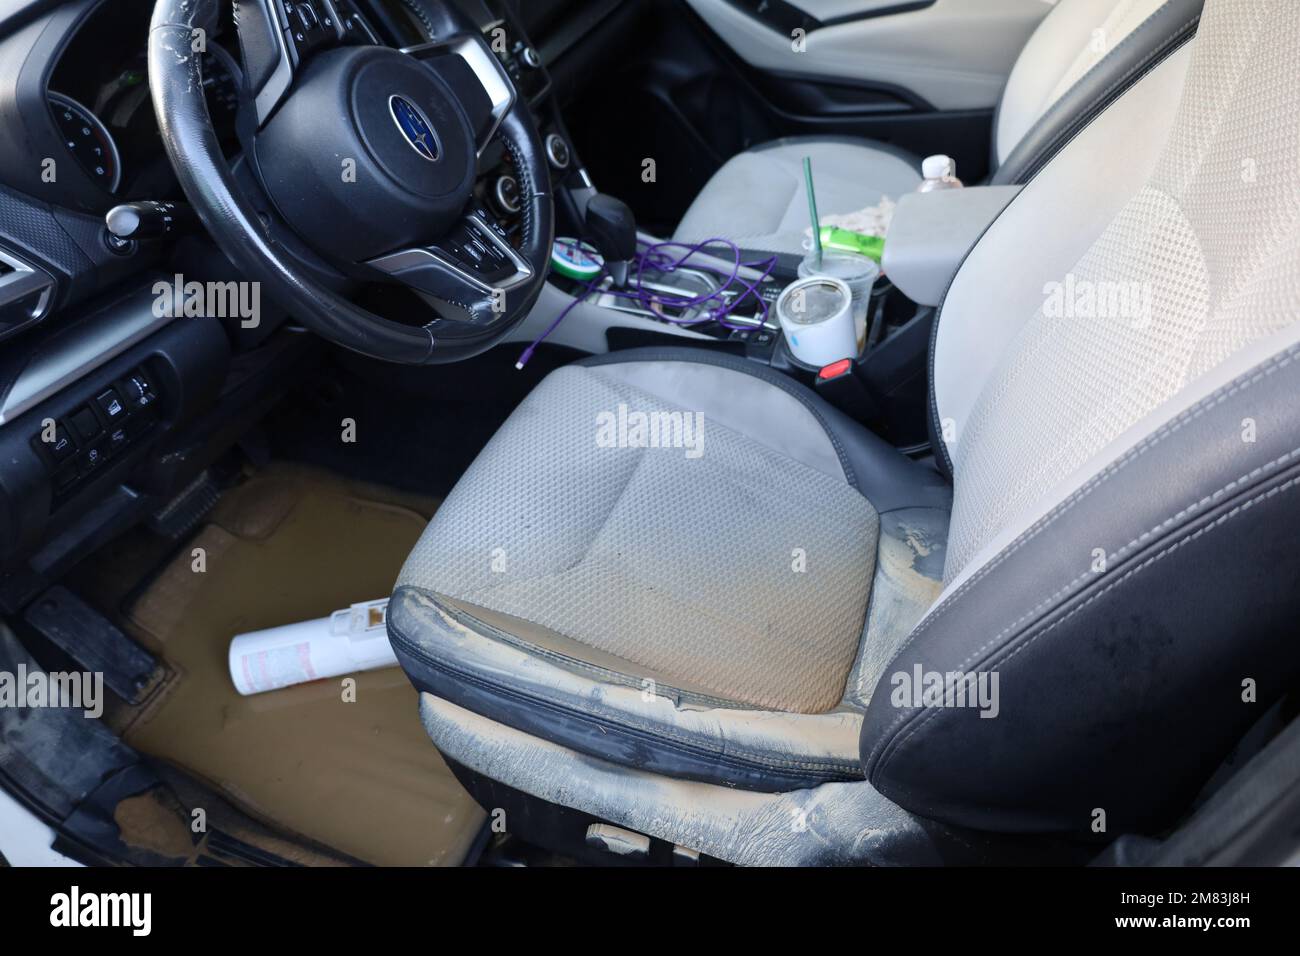 Santa Barbara, California, U.S.A. 11th Jan, 2023. A white, 2019 Suburu Forester on January 11, 2023, with All-wheel drive and X-Mode activated, was no match for a mountain stream that gushed across the Rancho Oso Horse Ranch and Campground driveway in the Los Padres National Forest. T.Context: The Santa Barbara Fire department pulled it out of the muck and parked it out of the way of other vehicles, but a tow truck has not been able to reach it. AAA Insurance agents have not been able to have it inspected, but expect it will be a total loss, as one explained, 'When a newer car is submerg Stock Photo